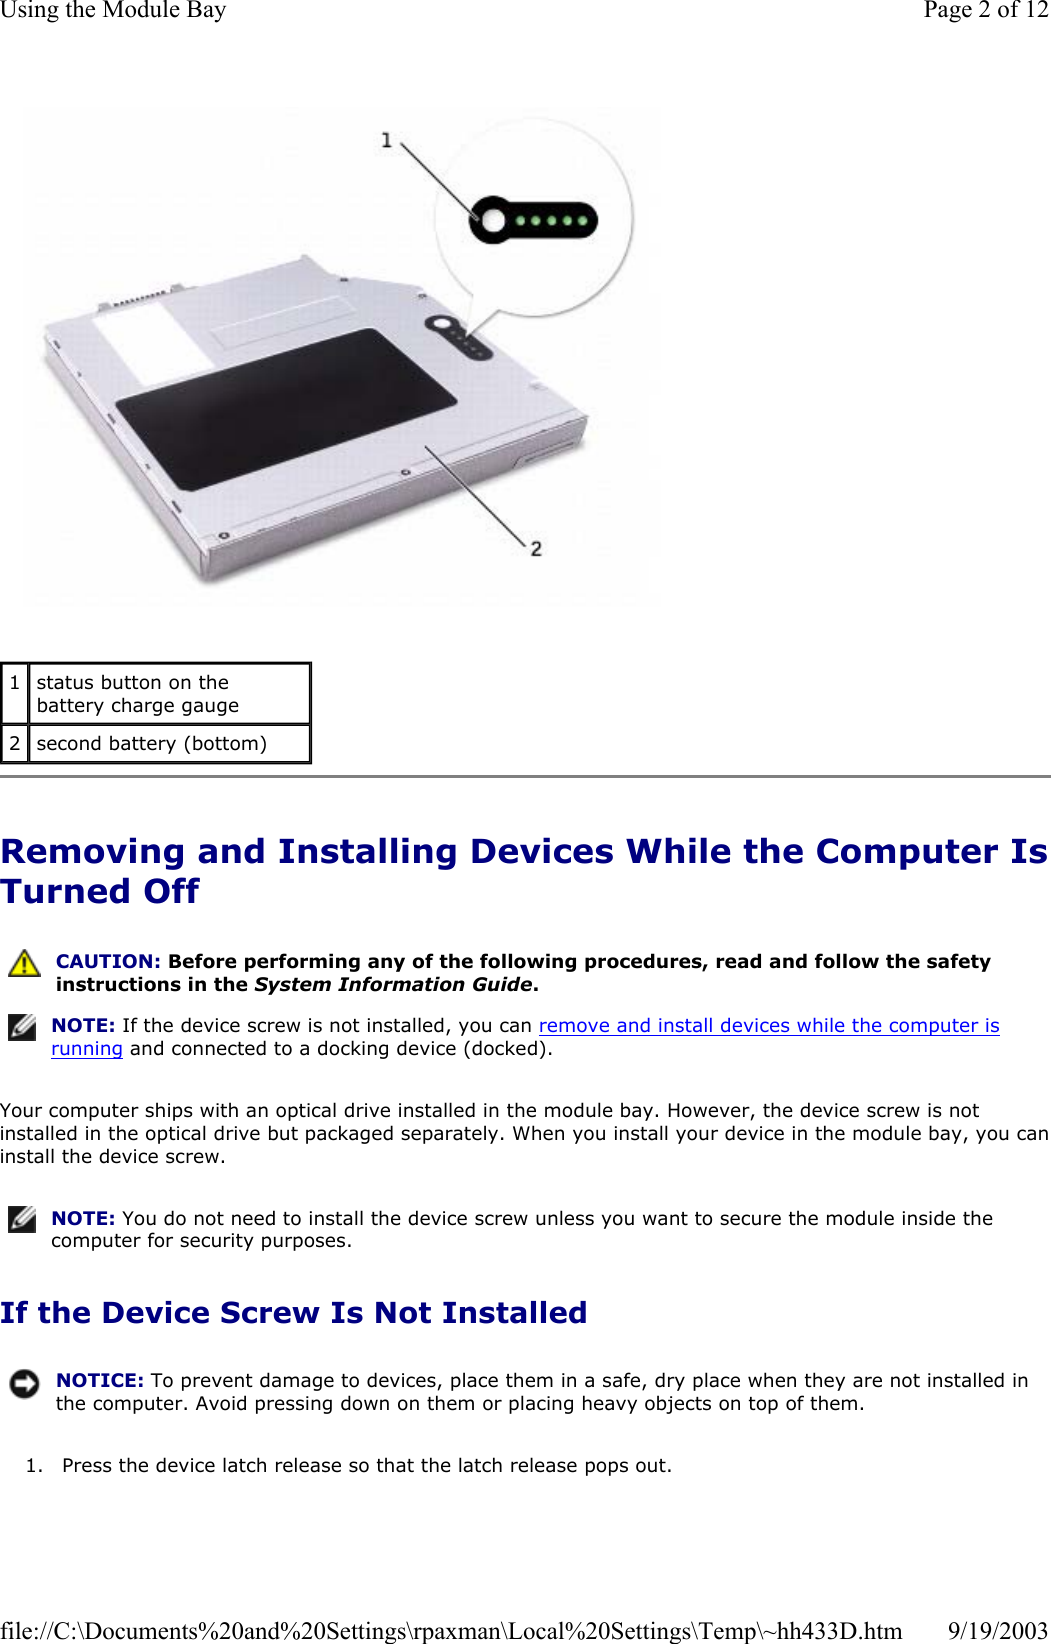   Removing and Installing Devices While the Computer IsTurned Off Your computer ships with an optical drive installed in the module bay. However, the device screw is not installed in the optical drive but packaged separately. When you install your device in the module bay, you caninstall the device screw. If the Device Screw Is Not Installed 1. Press the device latch release so that the latch release pops out.  1  status button on the battery charge gauge 2  second battery (bottom)  CAUTION: Before performing any of the following procedures, read and follow the safety instructions in the System Information Guide. NOTE: If the device screw is not installed, you can remove and install devices while the computer is running and connected to a docking device (docked).NOTE: You do not need to install the device screw unless you want to secure the module inside the computer for security purposes.NOTICE: To prevent damage to devices, place them in a safe, dry place when they are not installed in the computer. Avoid pressing down on them or placing heavy objects on top of them.Page 2 of 12Using the Module Bay9/19/2003file://C:\Documents%20and%20Settings\rpaxman\Local%20Settings\Temp\~hh433D.htm